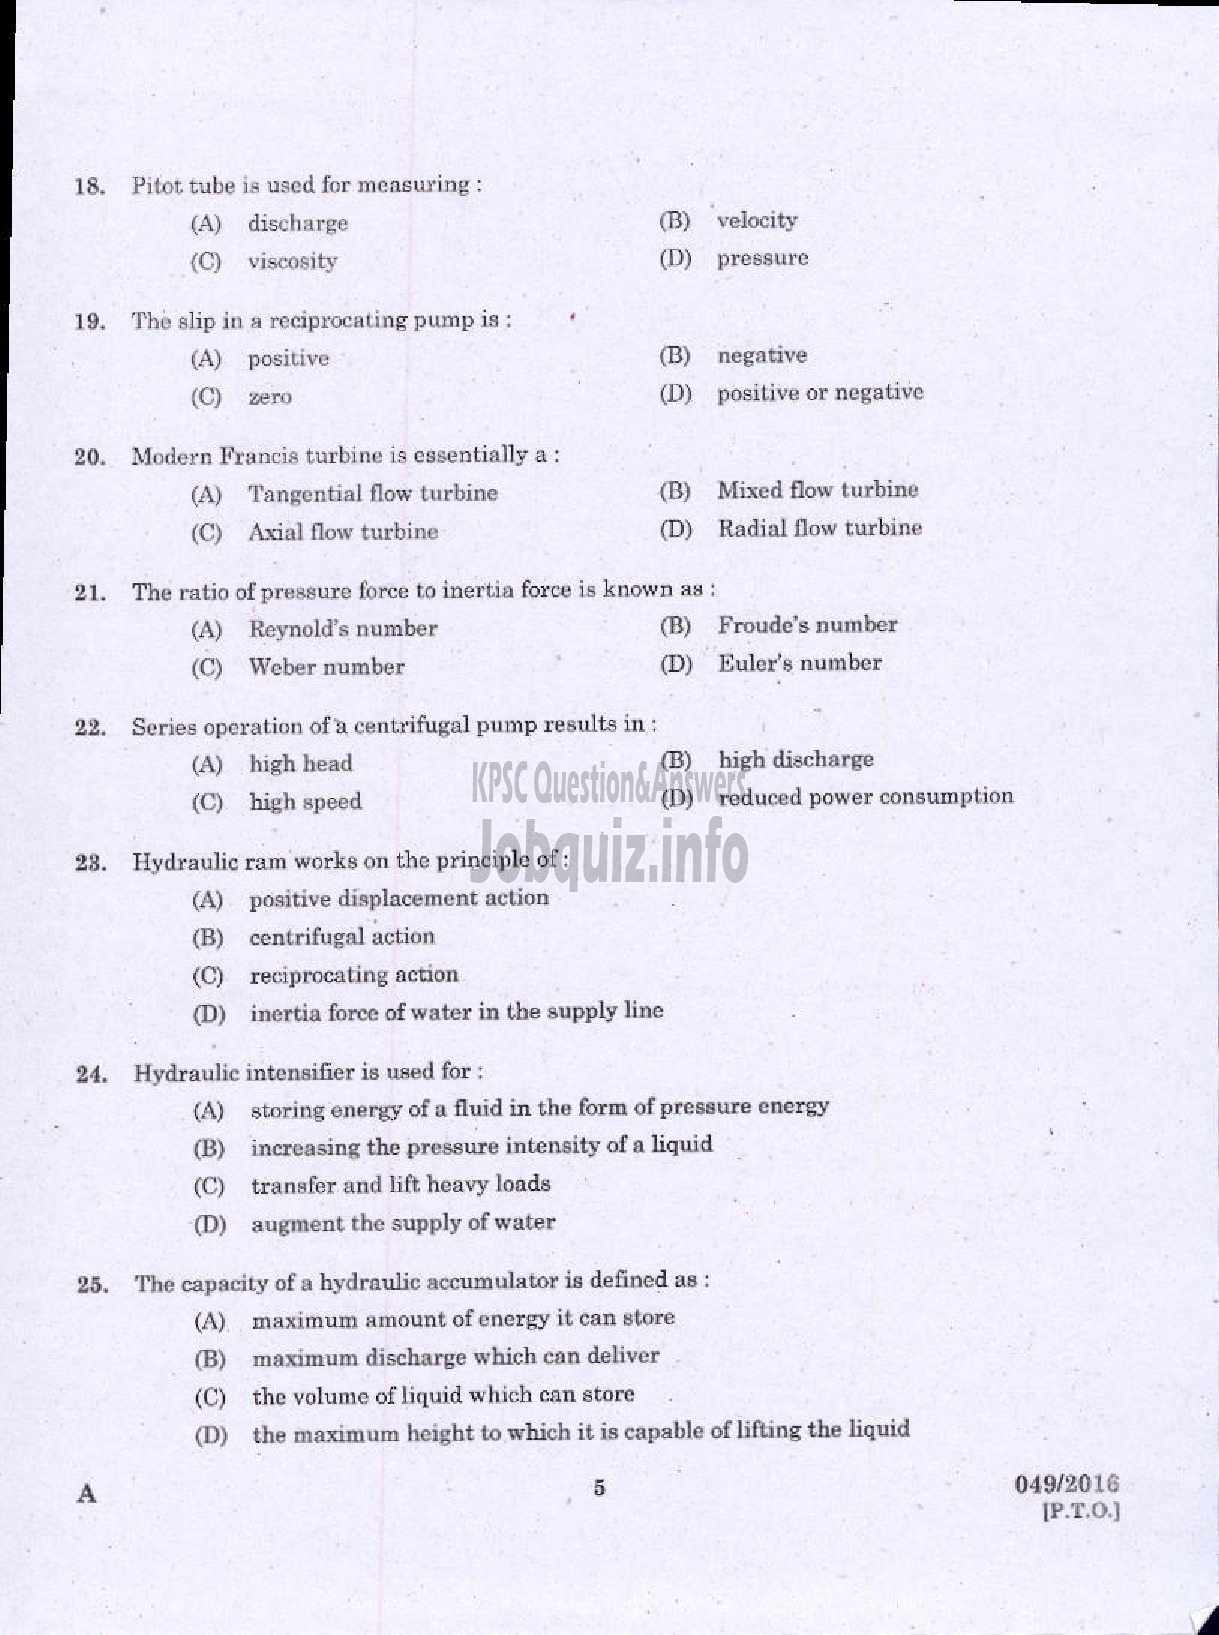 Kerala PSC Question Paper - WORKS MANAGER STATE WATER TRANSPORT-3